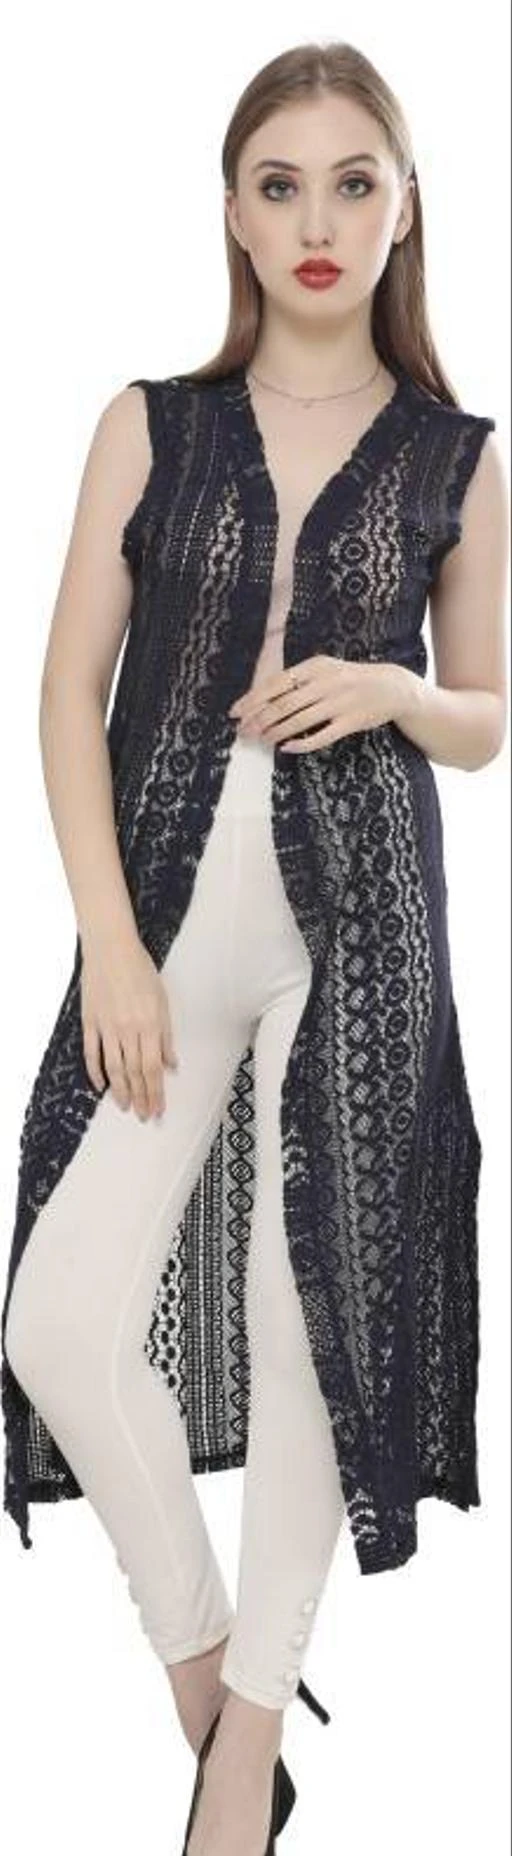 Checkout this latest Capes, Shrugs & Ponchos
Product Name: *Stylish Net Shrug*
Sizes:
M, L, XL
Country of Origin: India
Easy Returns Available In Case Of Any Issue


SKU: SNS_2
Supplier Name: Sweek Fashion

Code: 504-517019-3501

Catalog Name: Cora Stylus Net Shrugs Vol 2
CatalogID_57153
M04-C07-SC1024